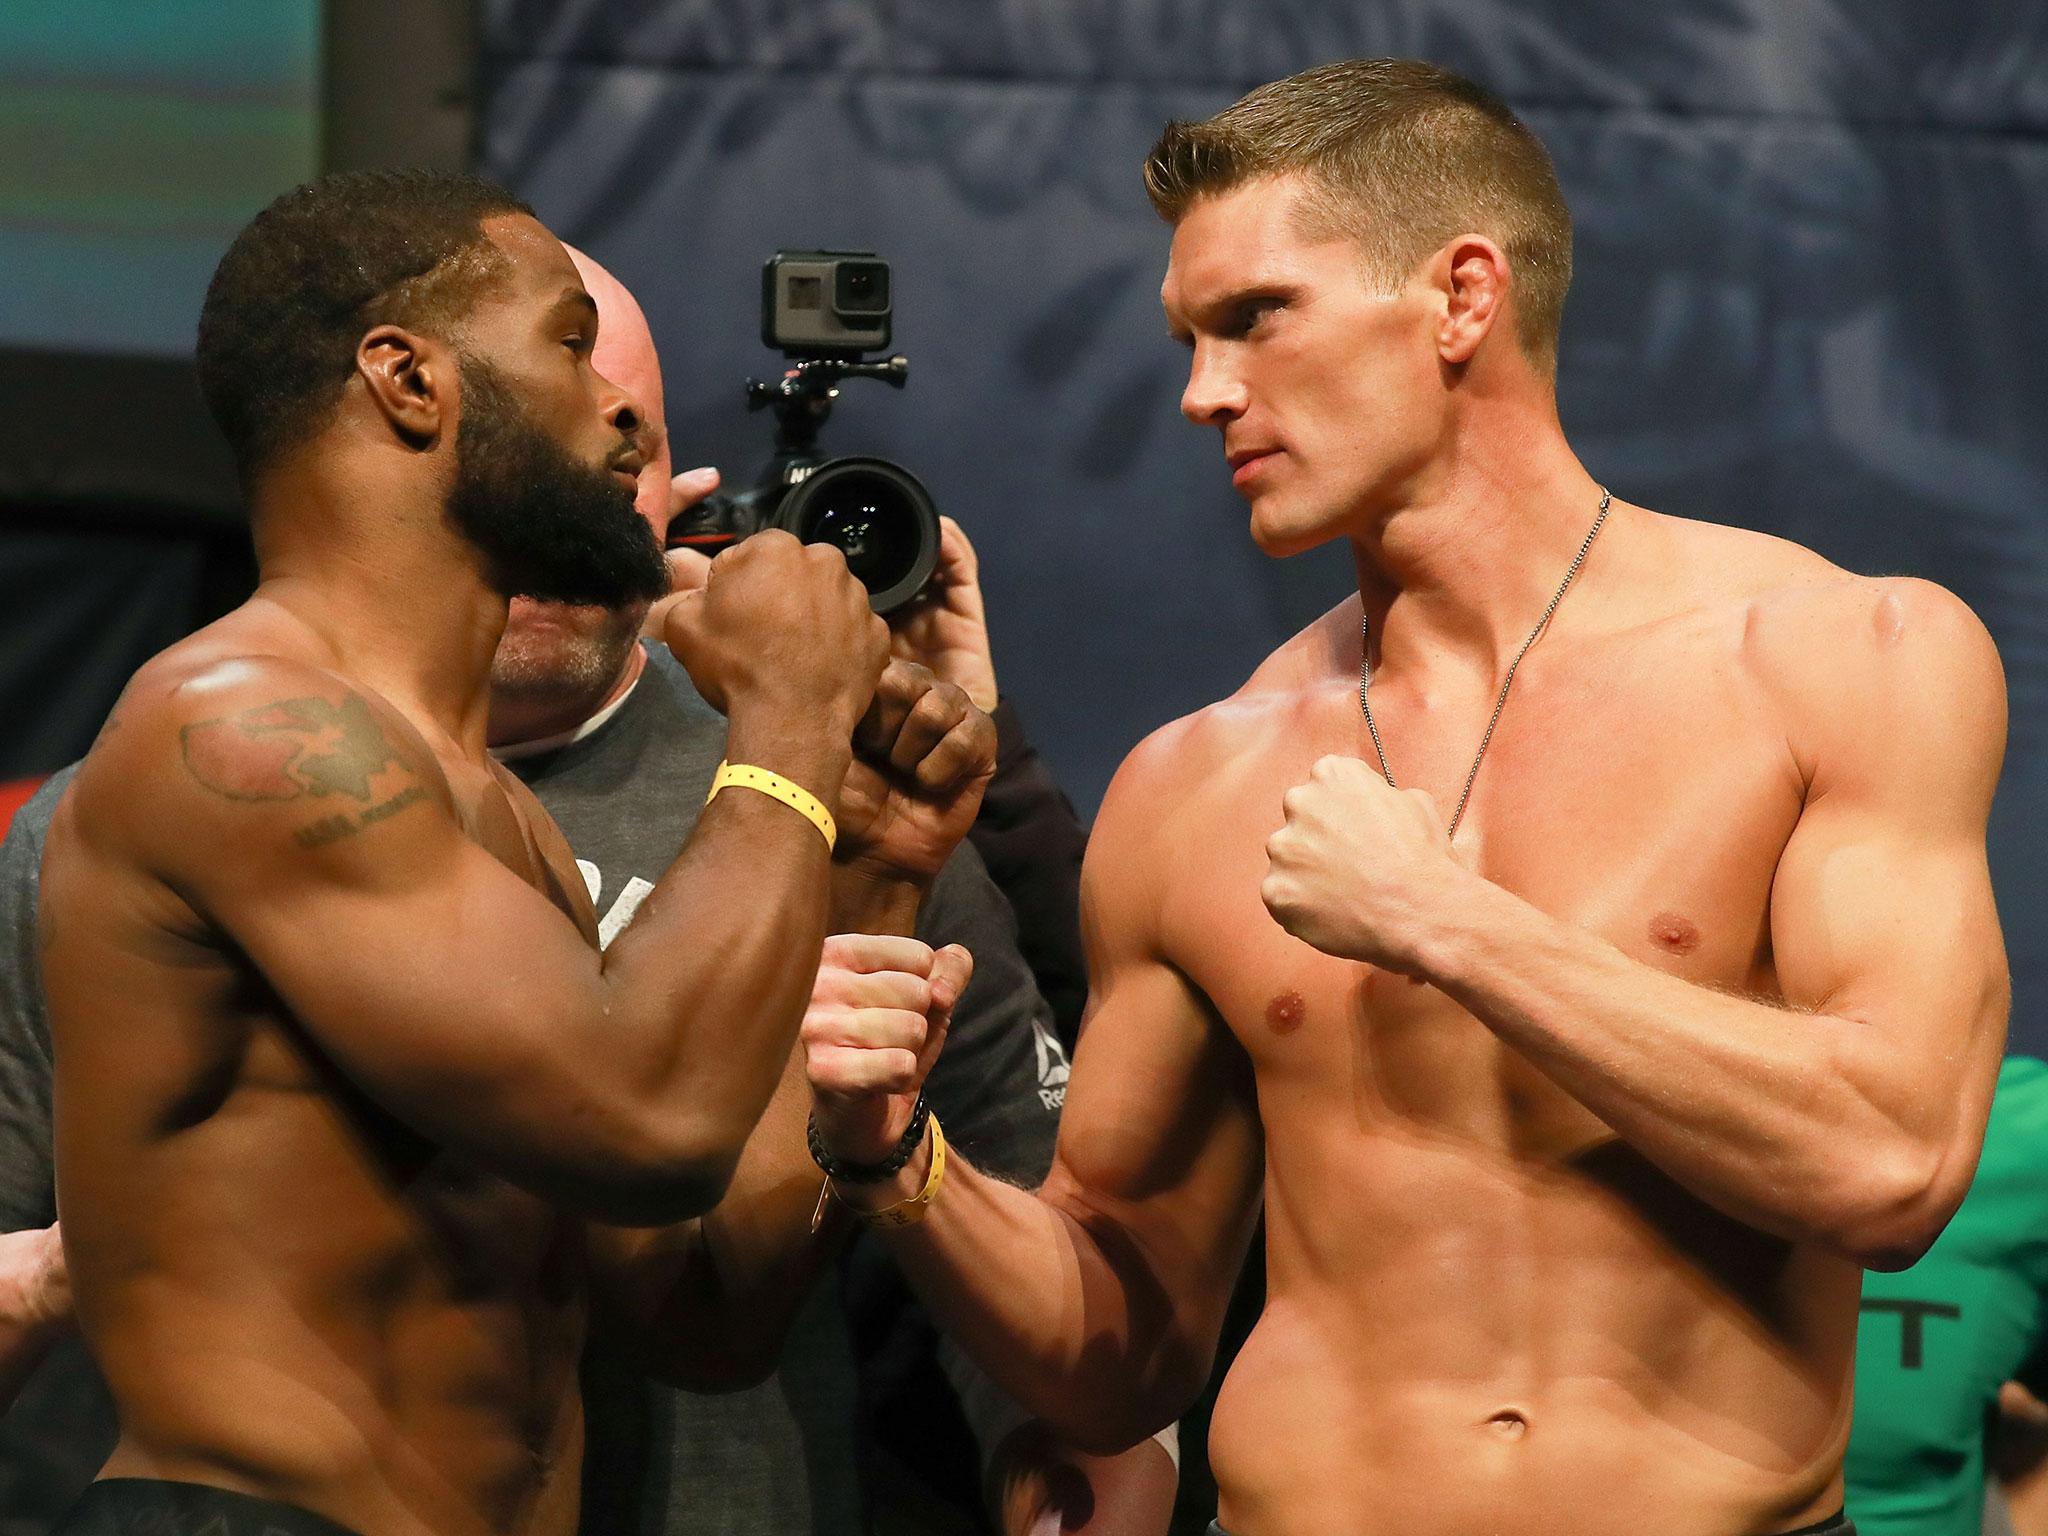 Tyron Woodley and Stephen 'Wonderboy' Thompson meet for the second time at UFC 209